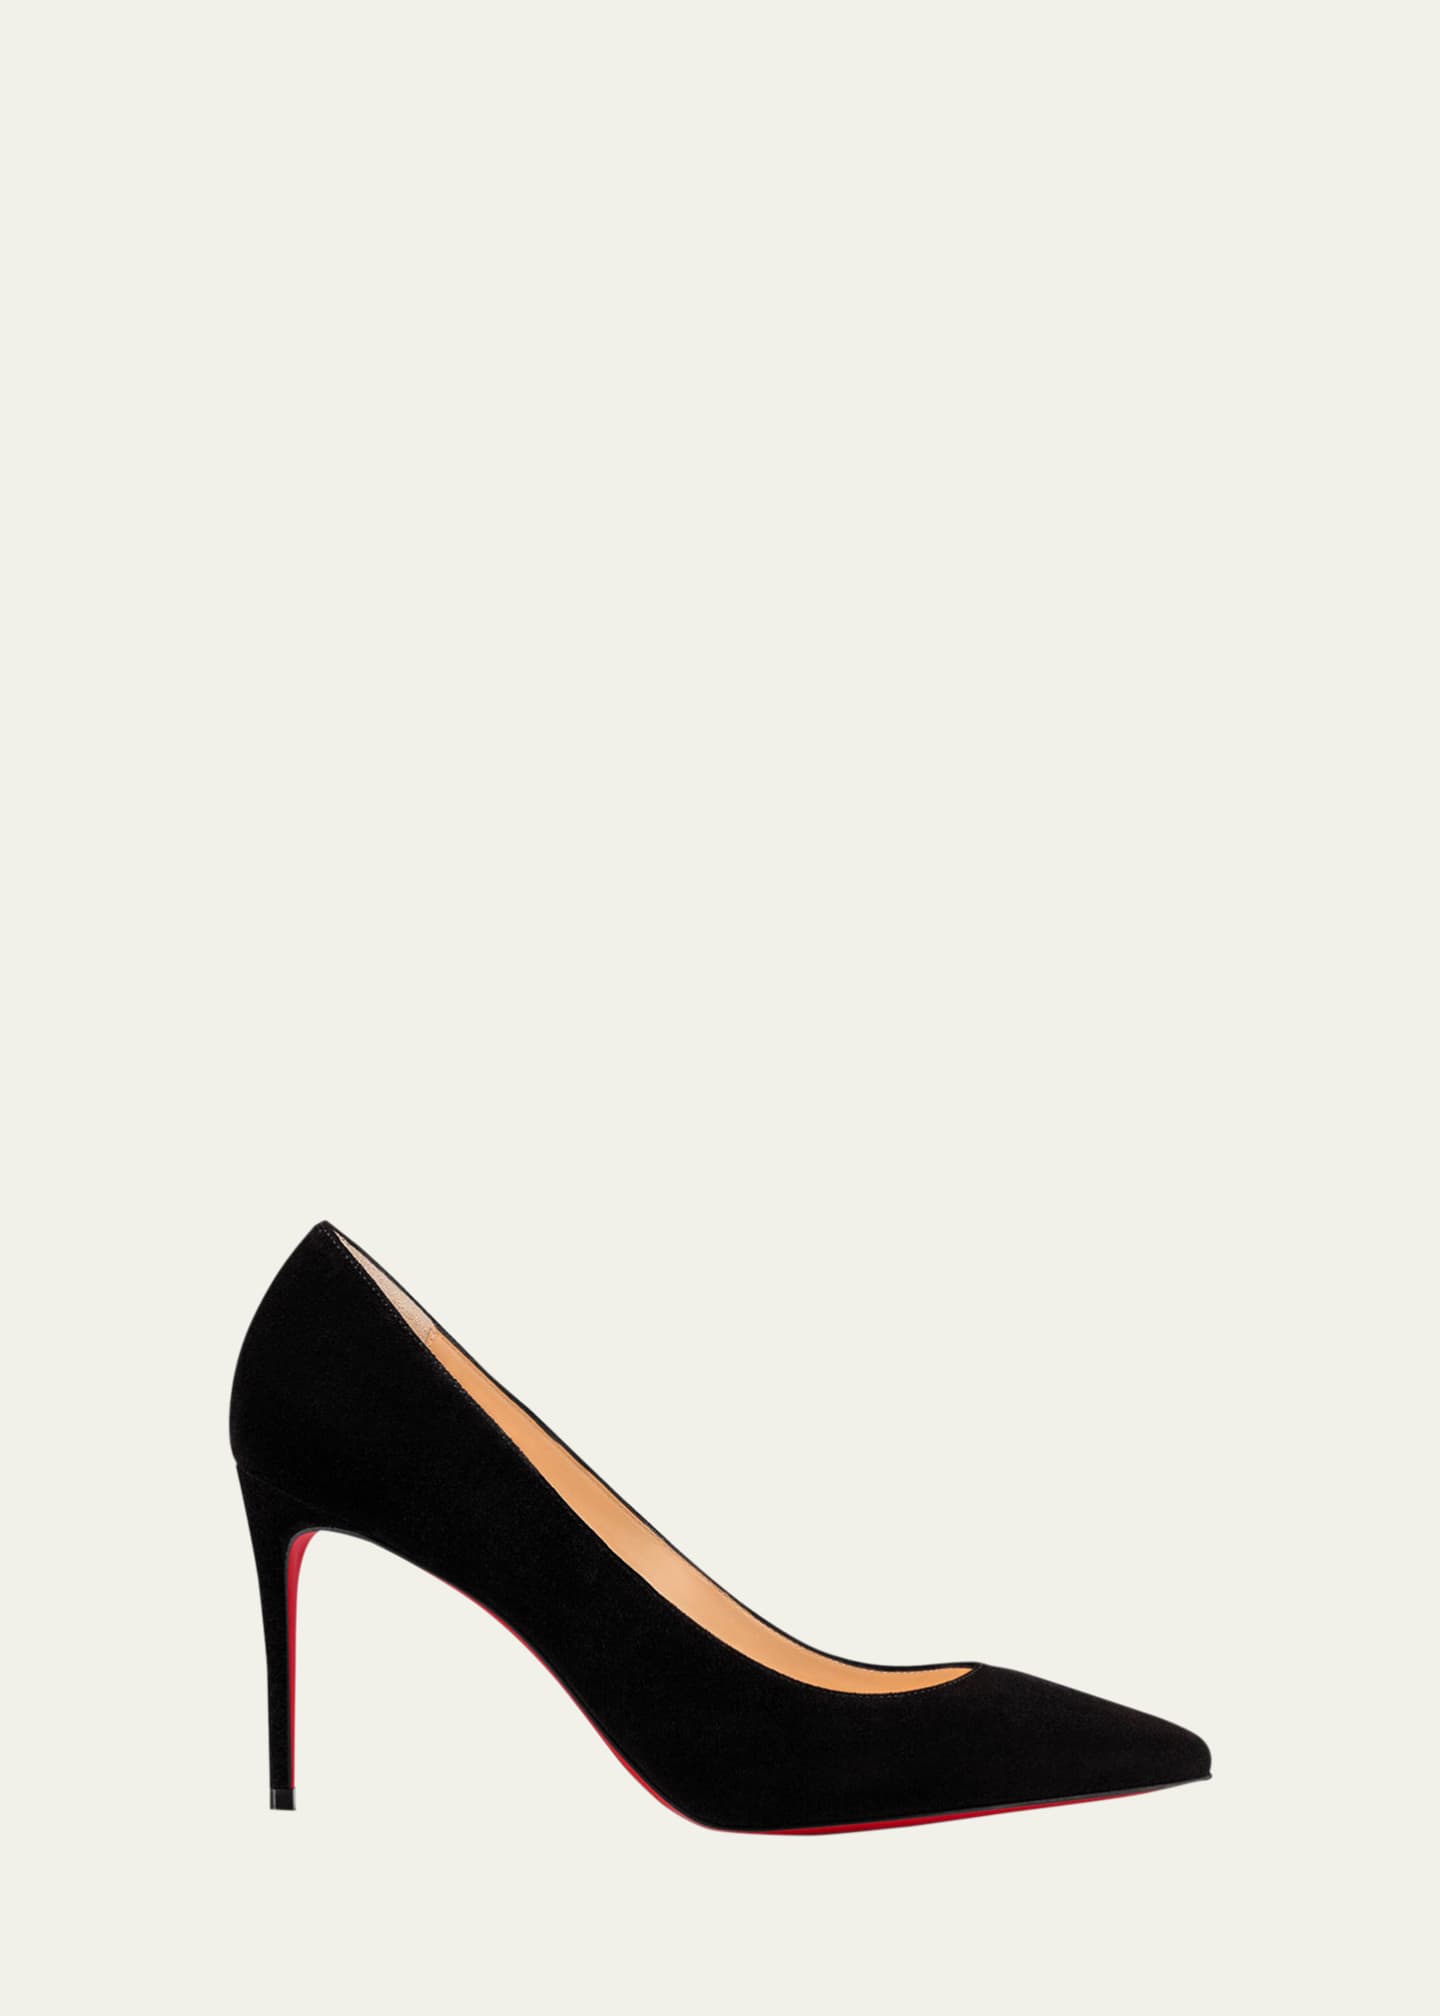 Christian Louboutin Kate 85mm Suede Red Sole Pumps